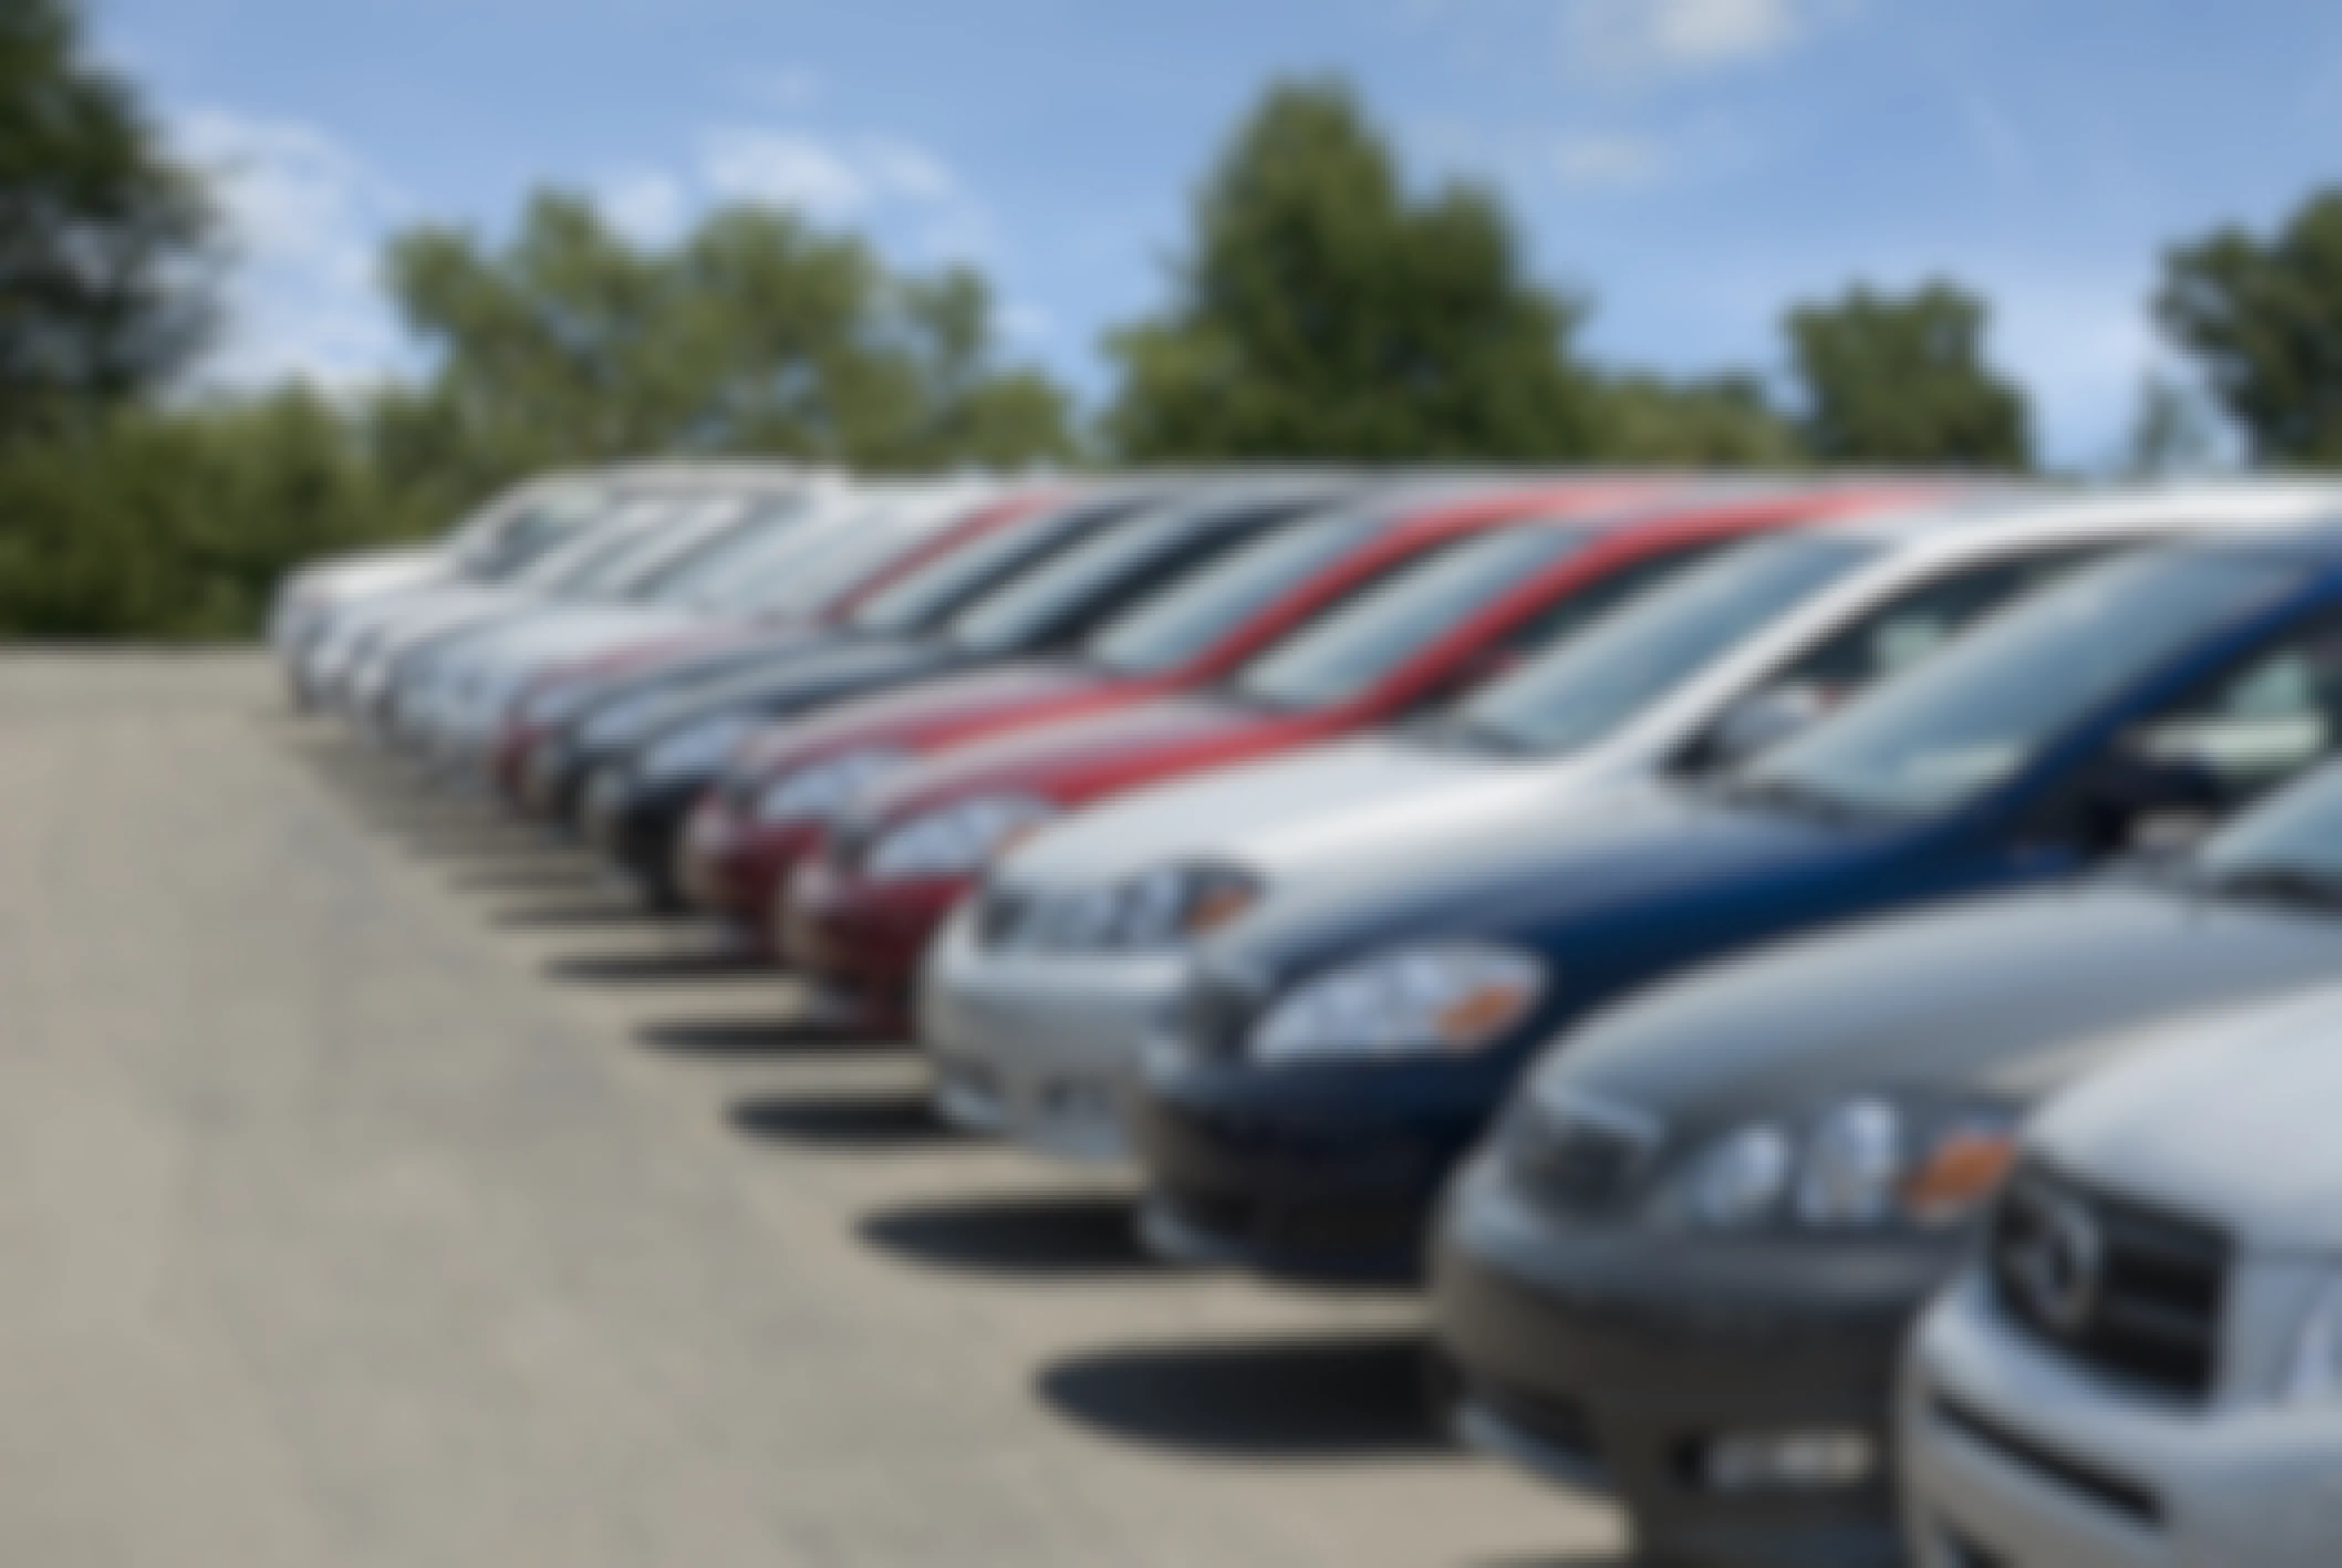 Bargain Car Prices: Is It a Good Time to Buy a Car?